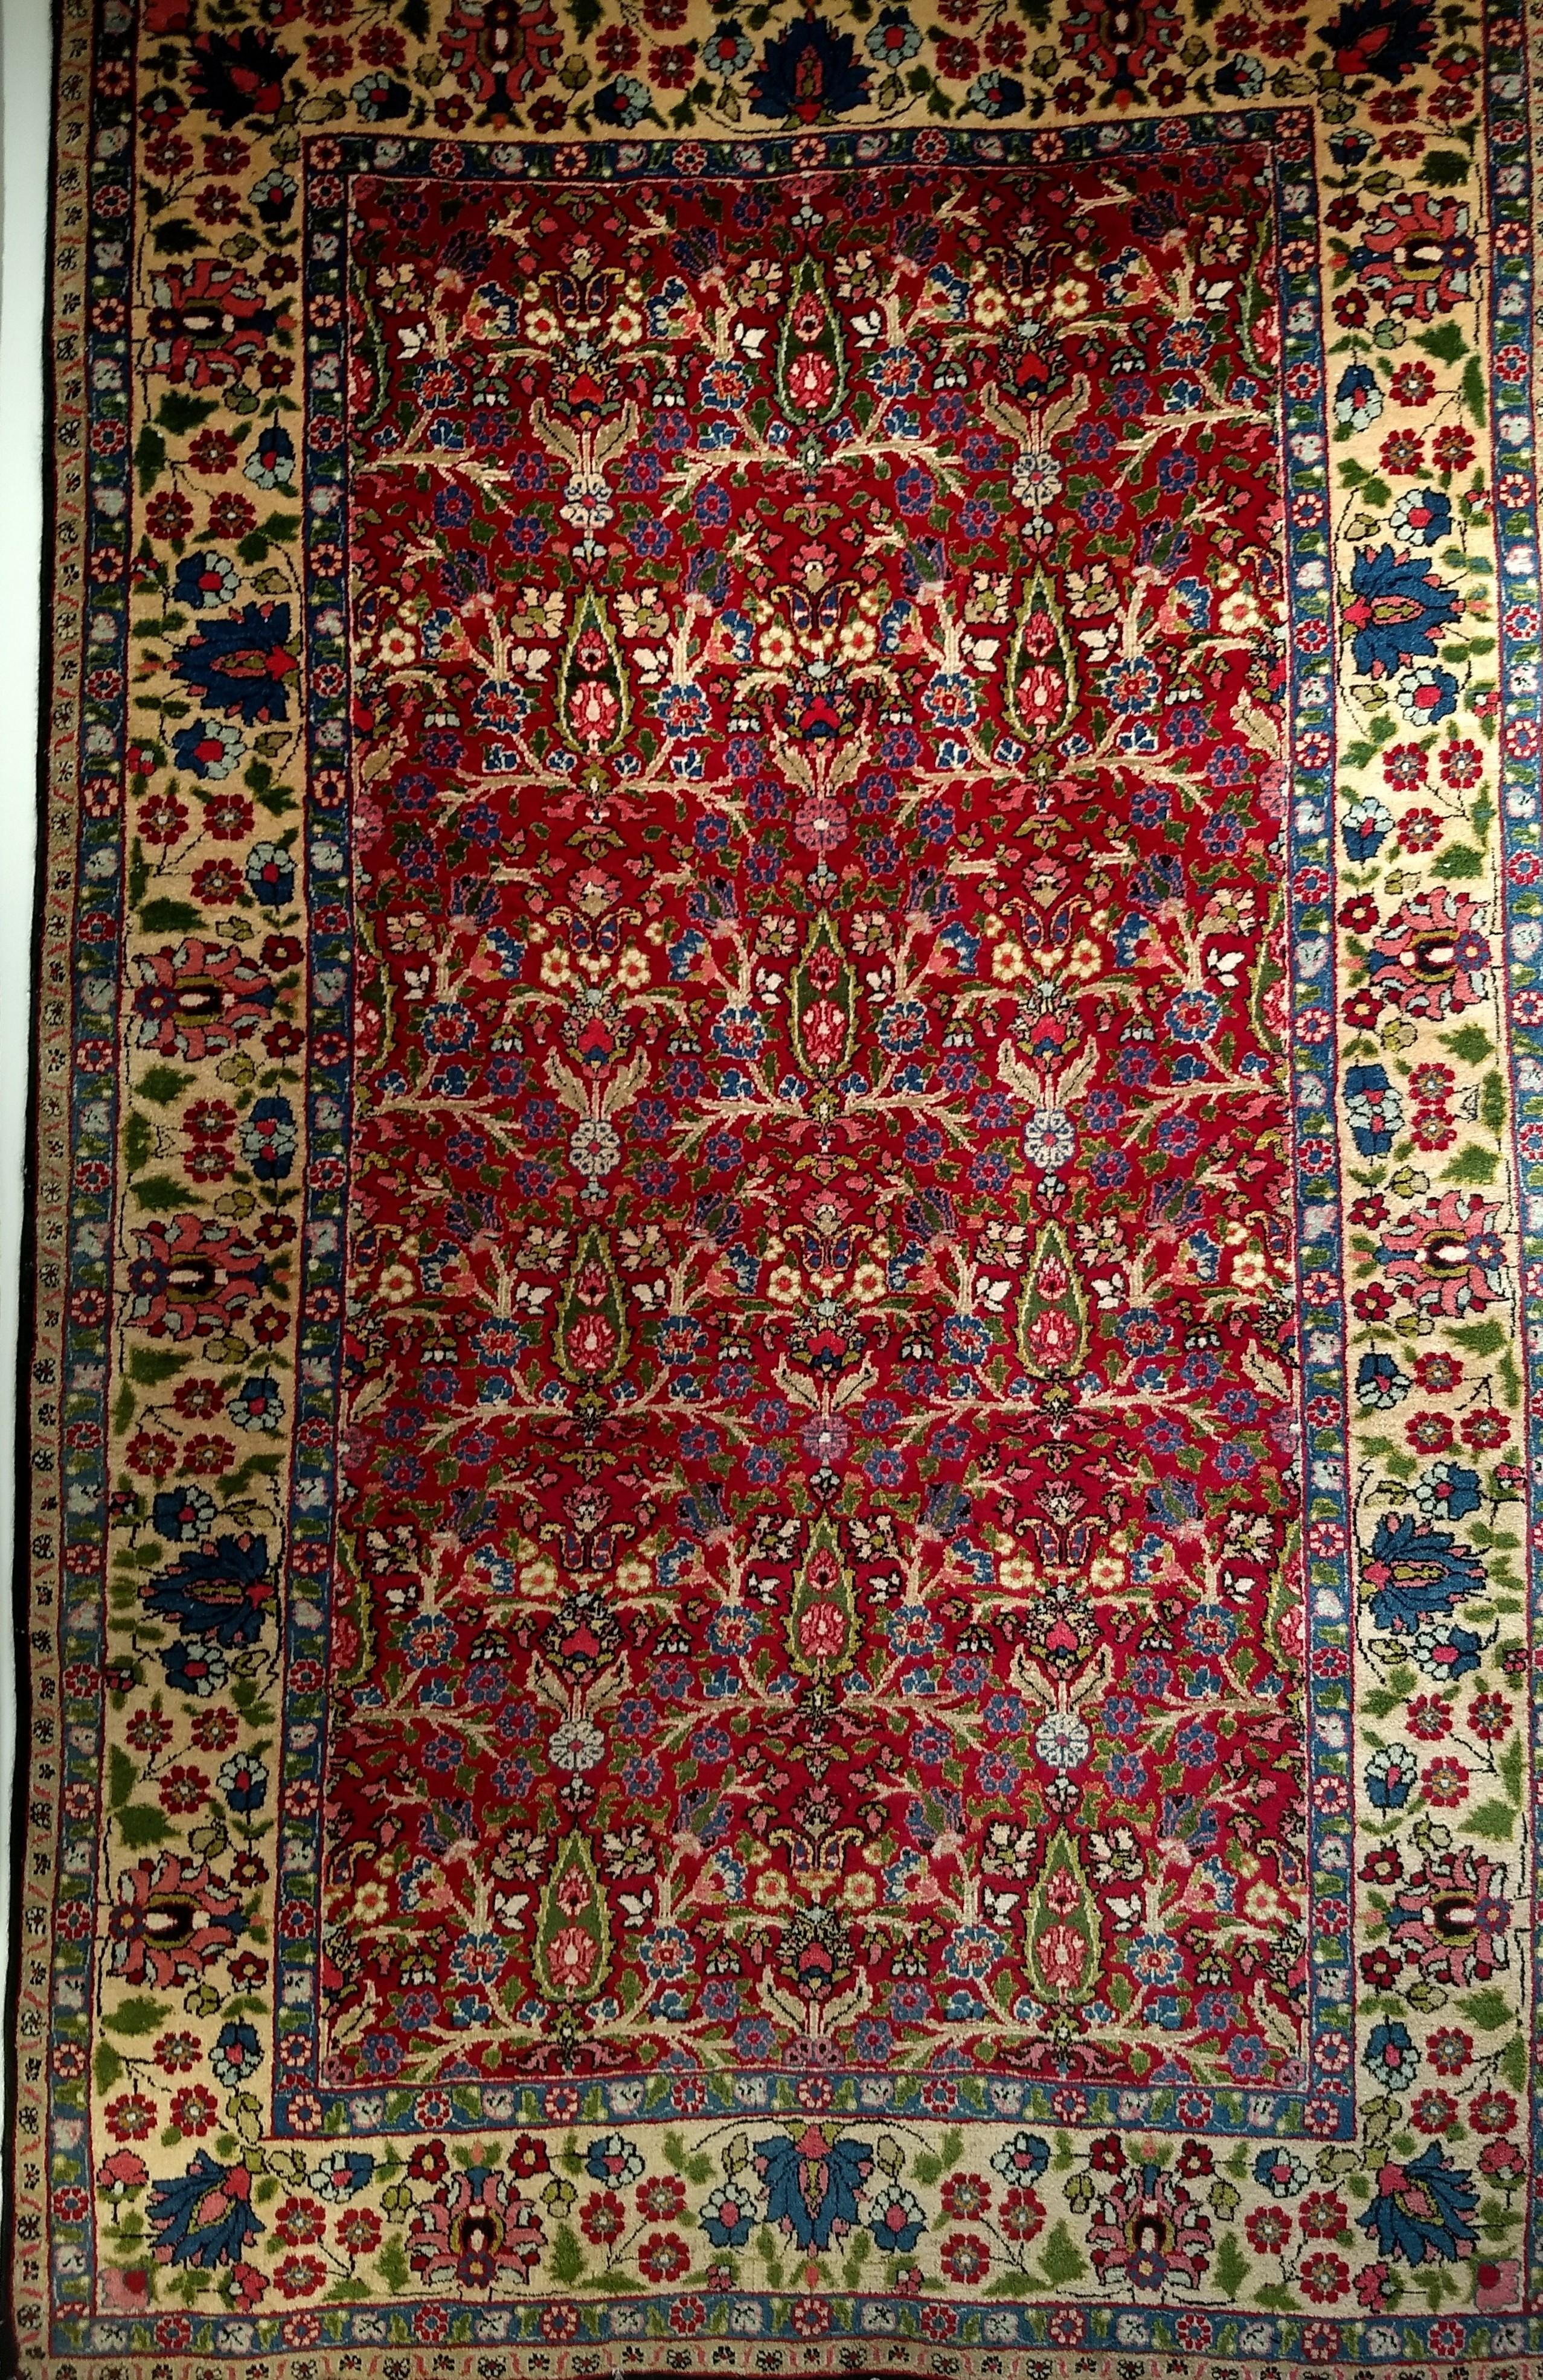 Vintage Persian Tabriz area rug in an allover cypress trees floral pattern from the 2nd quarter of the 1900s.  The rug design has the cypress tree in a repeated format.  The cypress tree is considered a symbol of life in Persian culture.  The trees